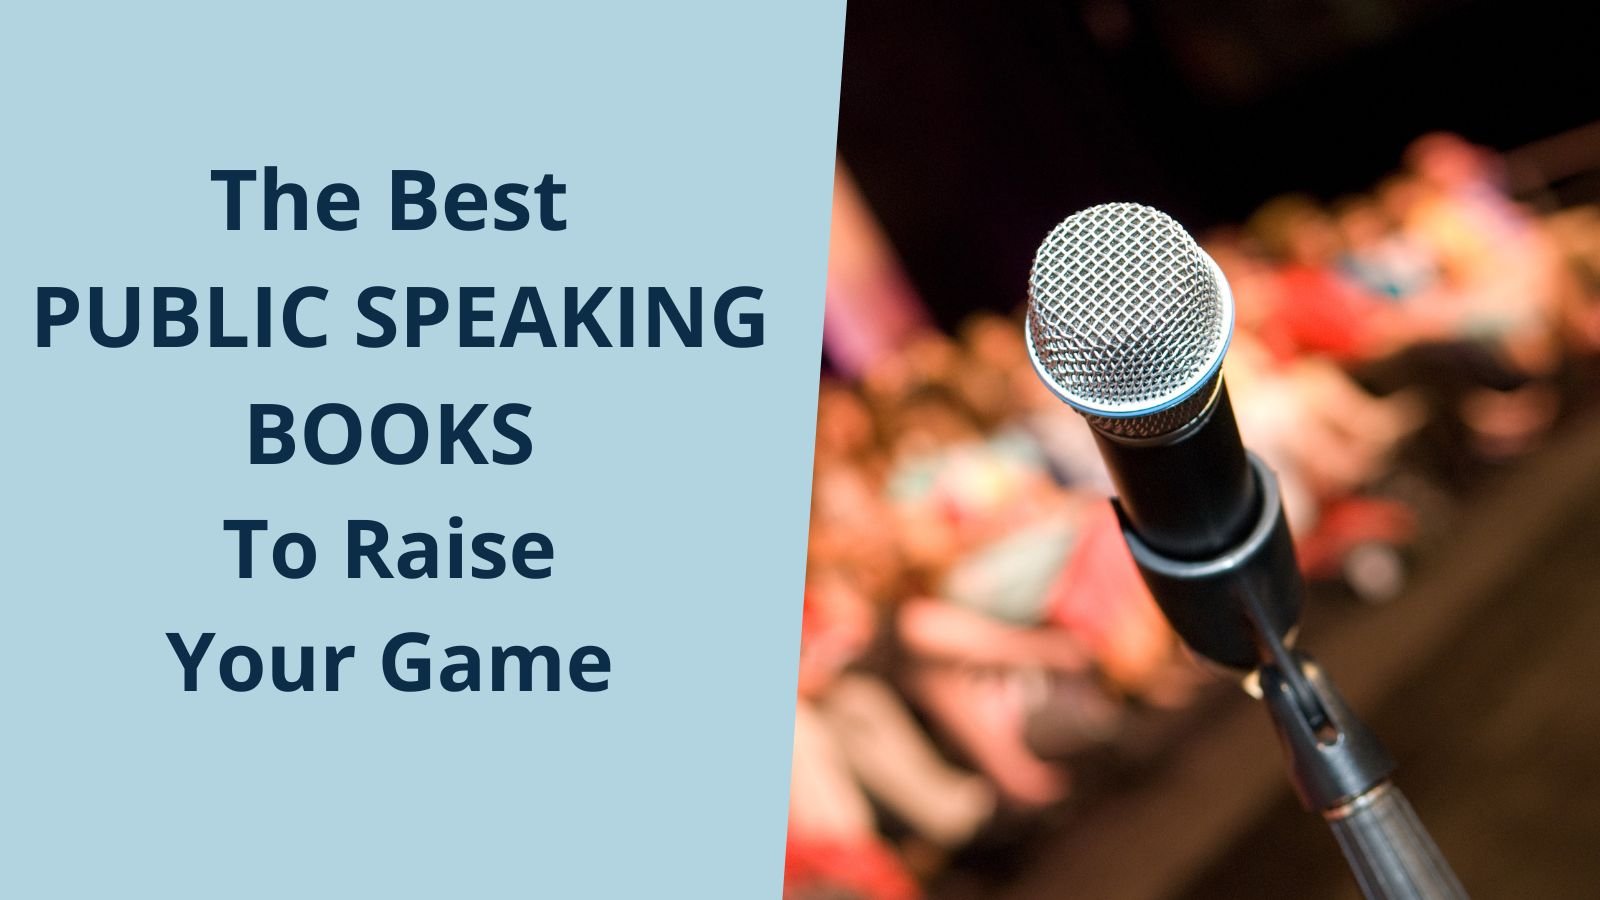 Best Public Speaking books article image with a Mic